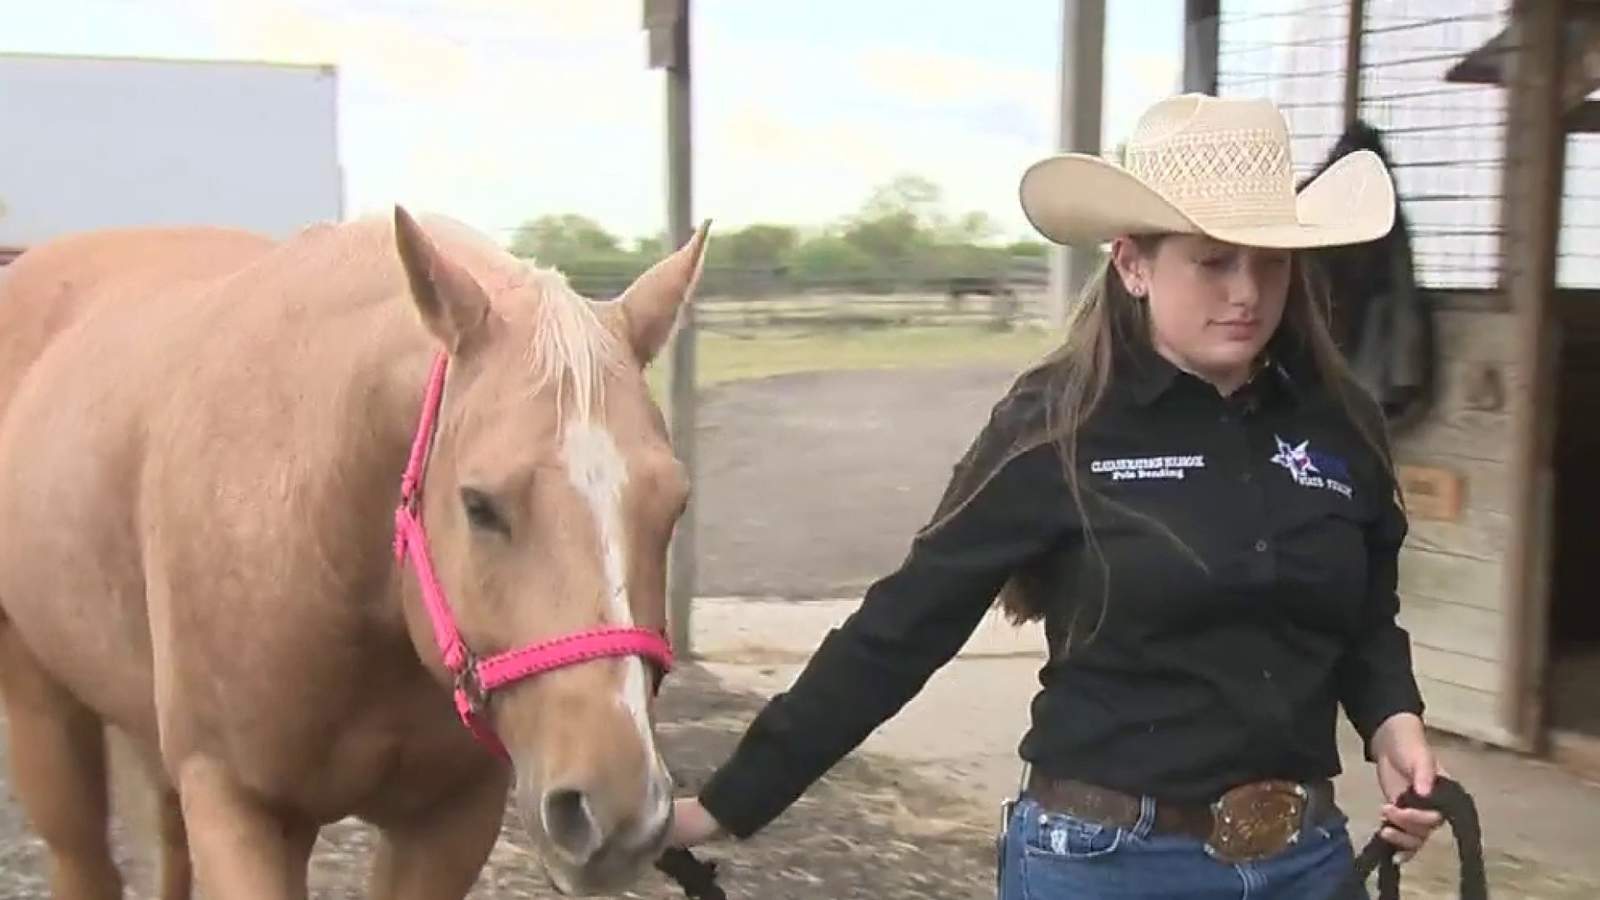 What’s Up South Texas!: Rodeo teen barrel races past life’s obstacles to find success